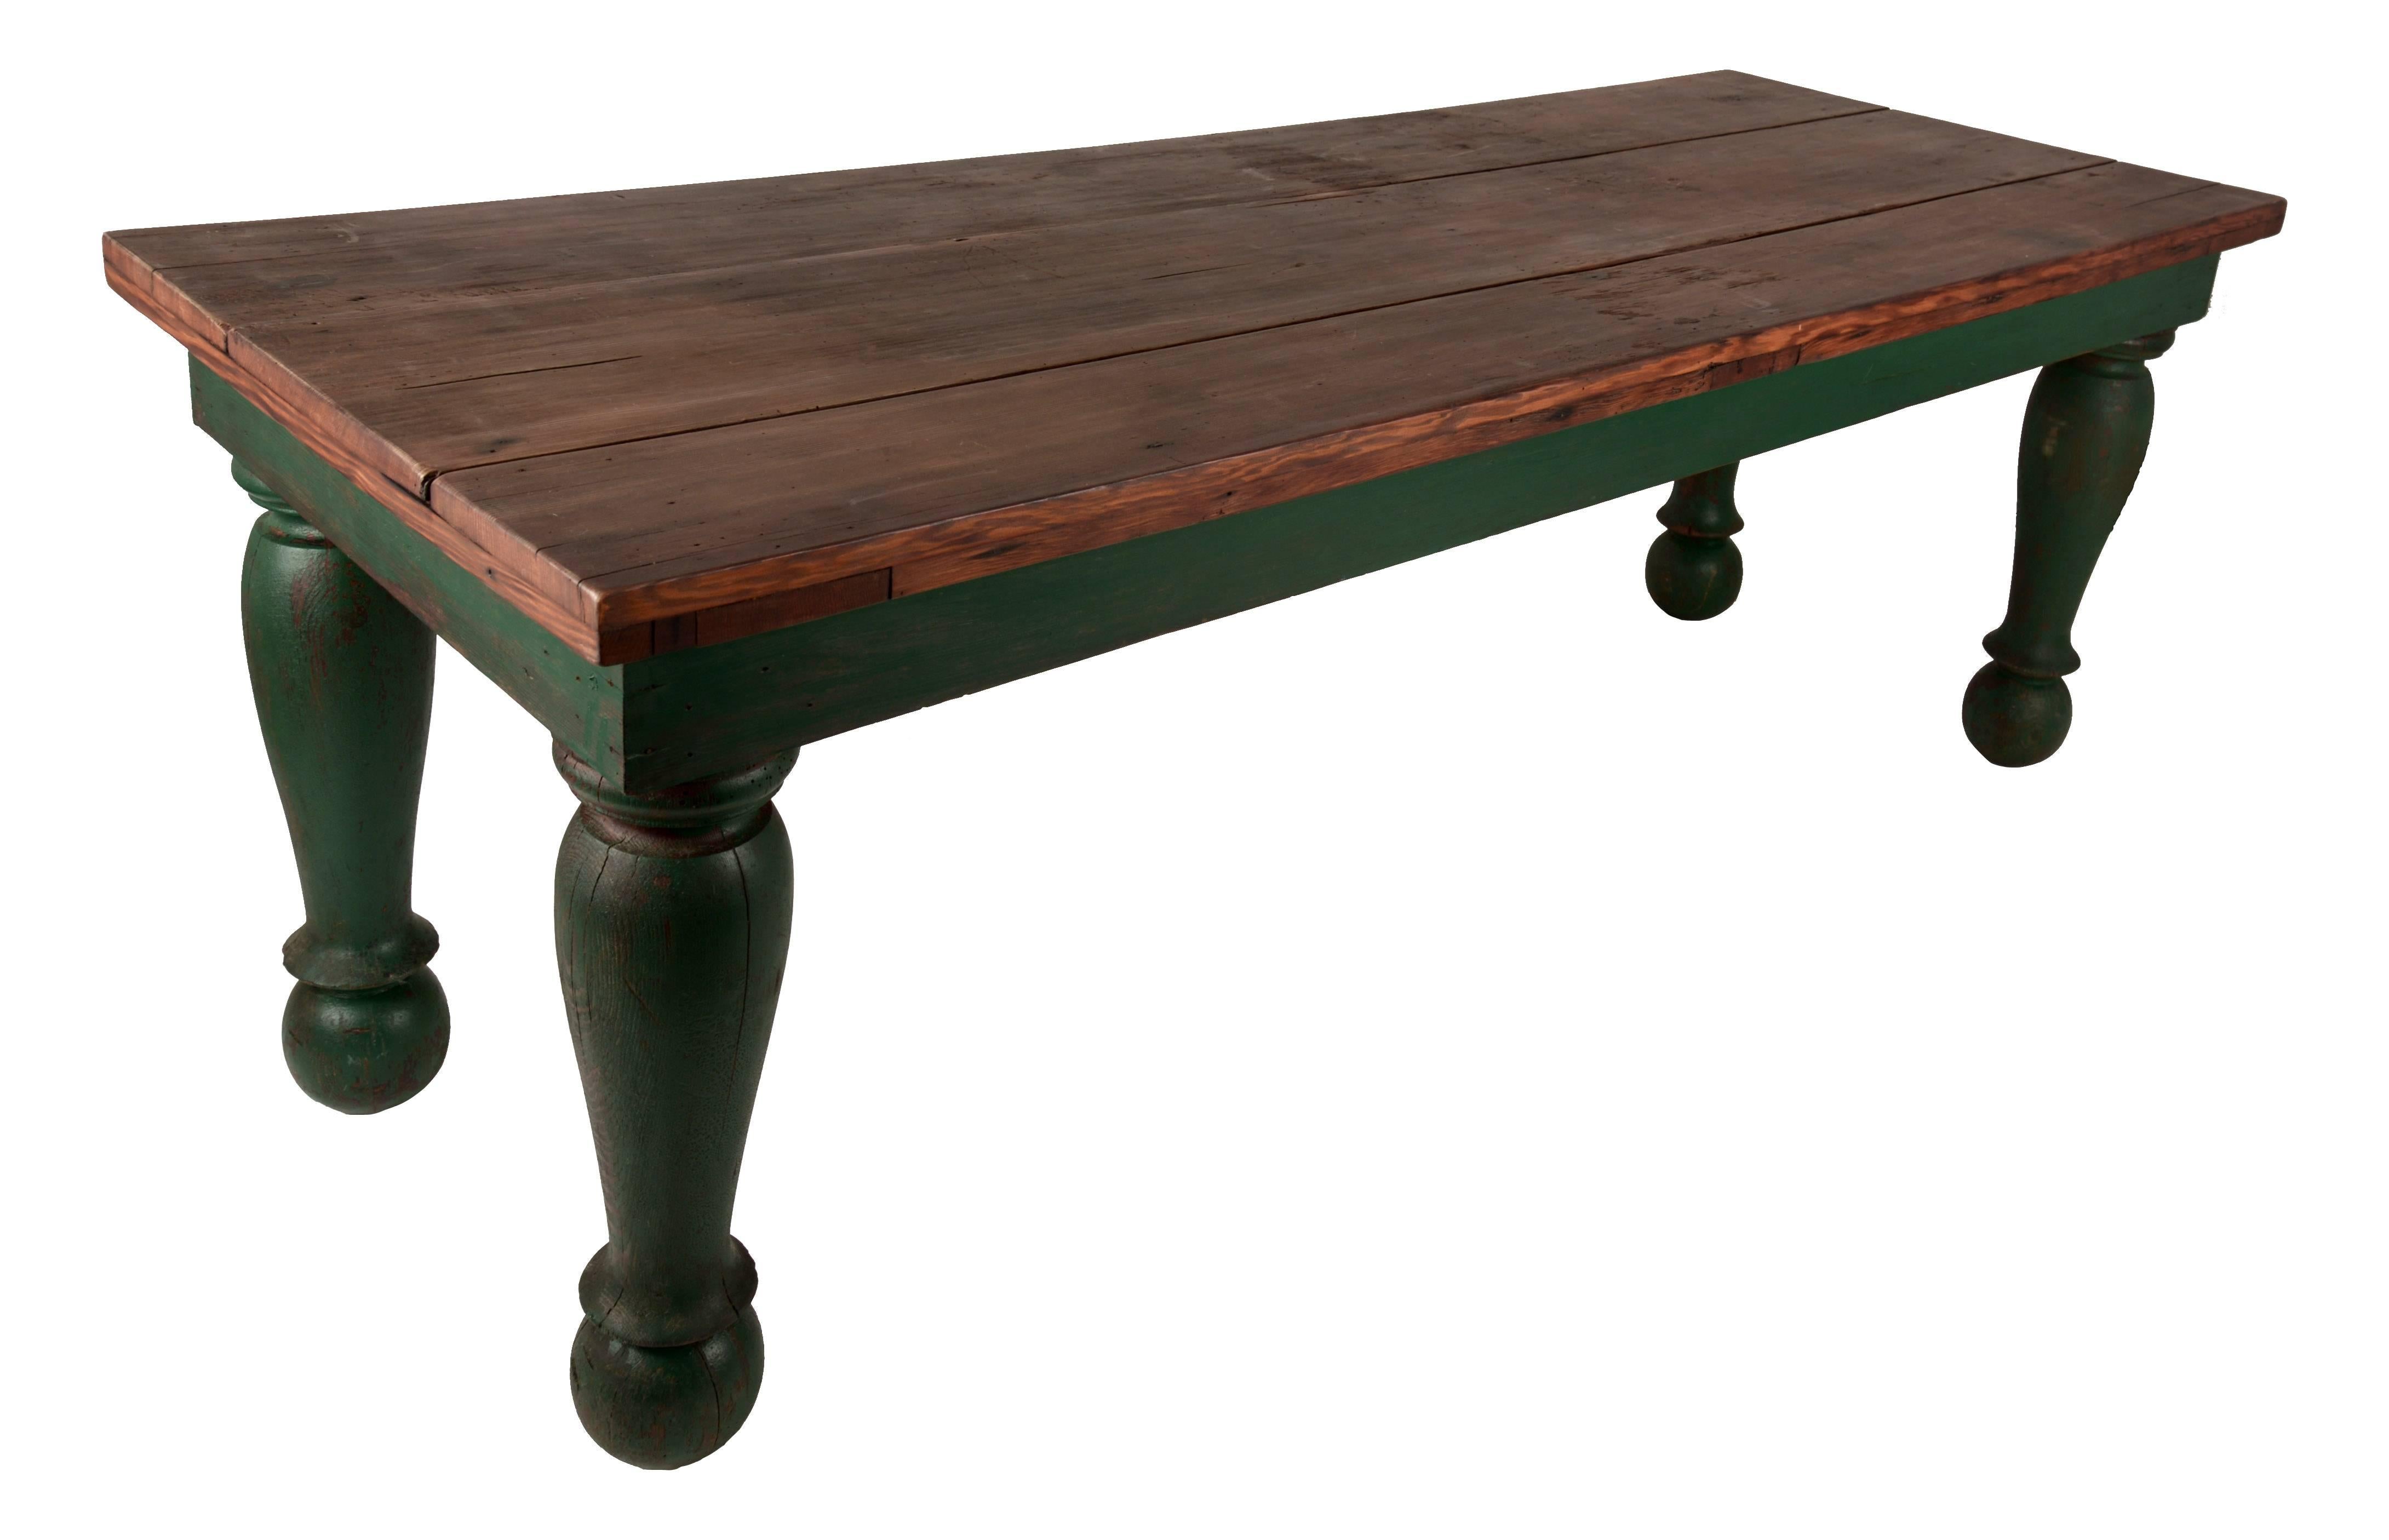 Late 19 century low table with wood top and massive turned green painted wooden legs.